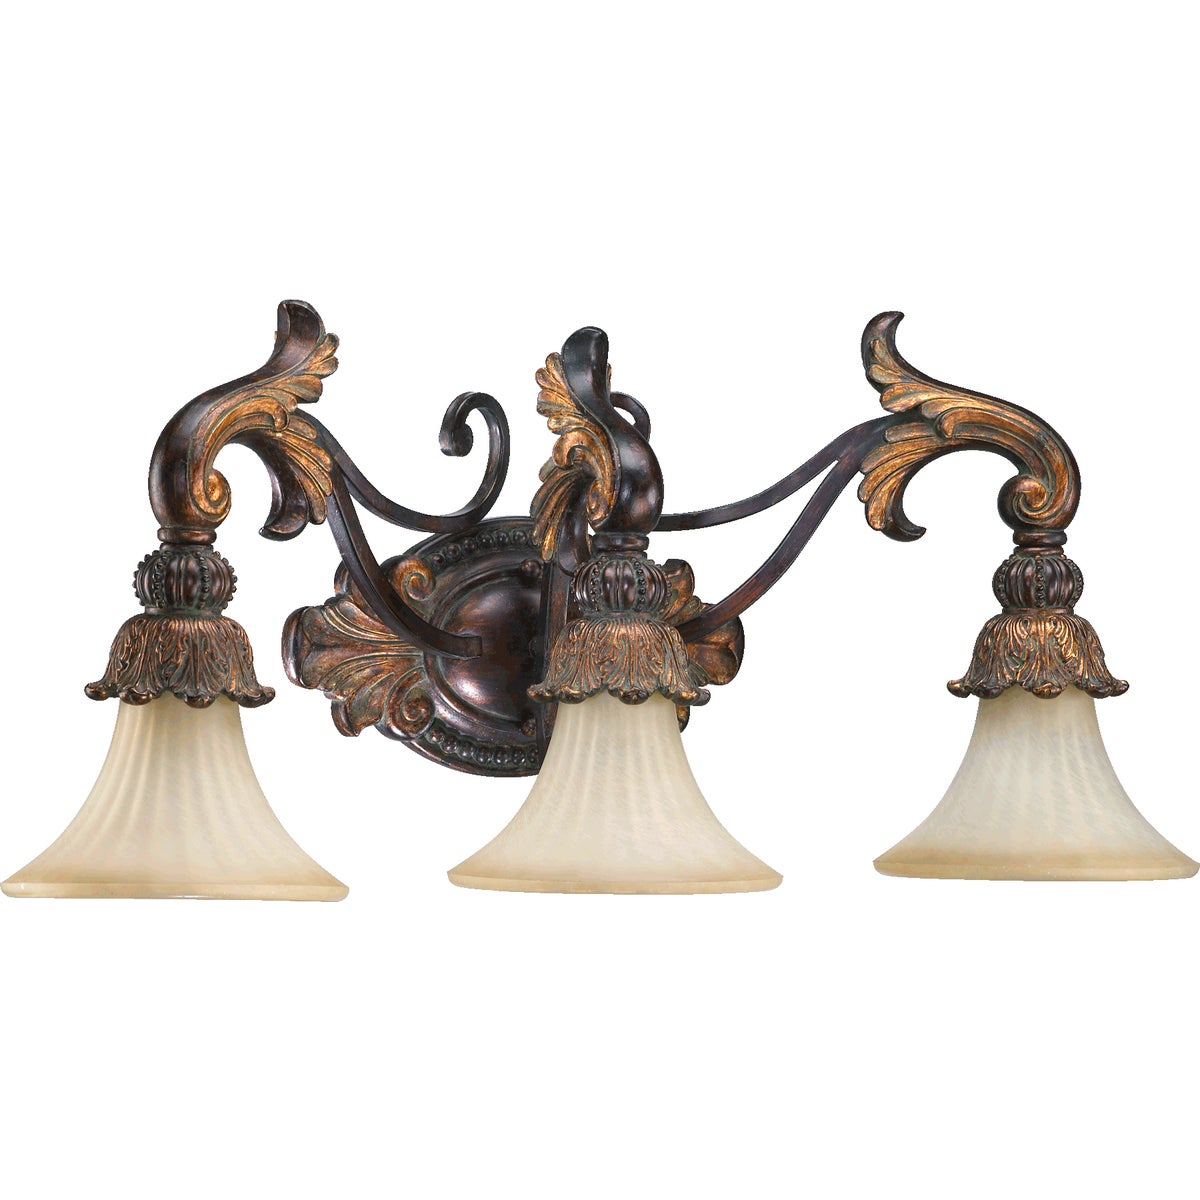 Traditional Vanity Light with three lamps, corsican gold finish, and ornate wood and bronze detailing. 27.5"W x 13"H x 9.75"E.